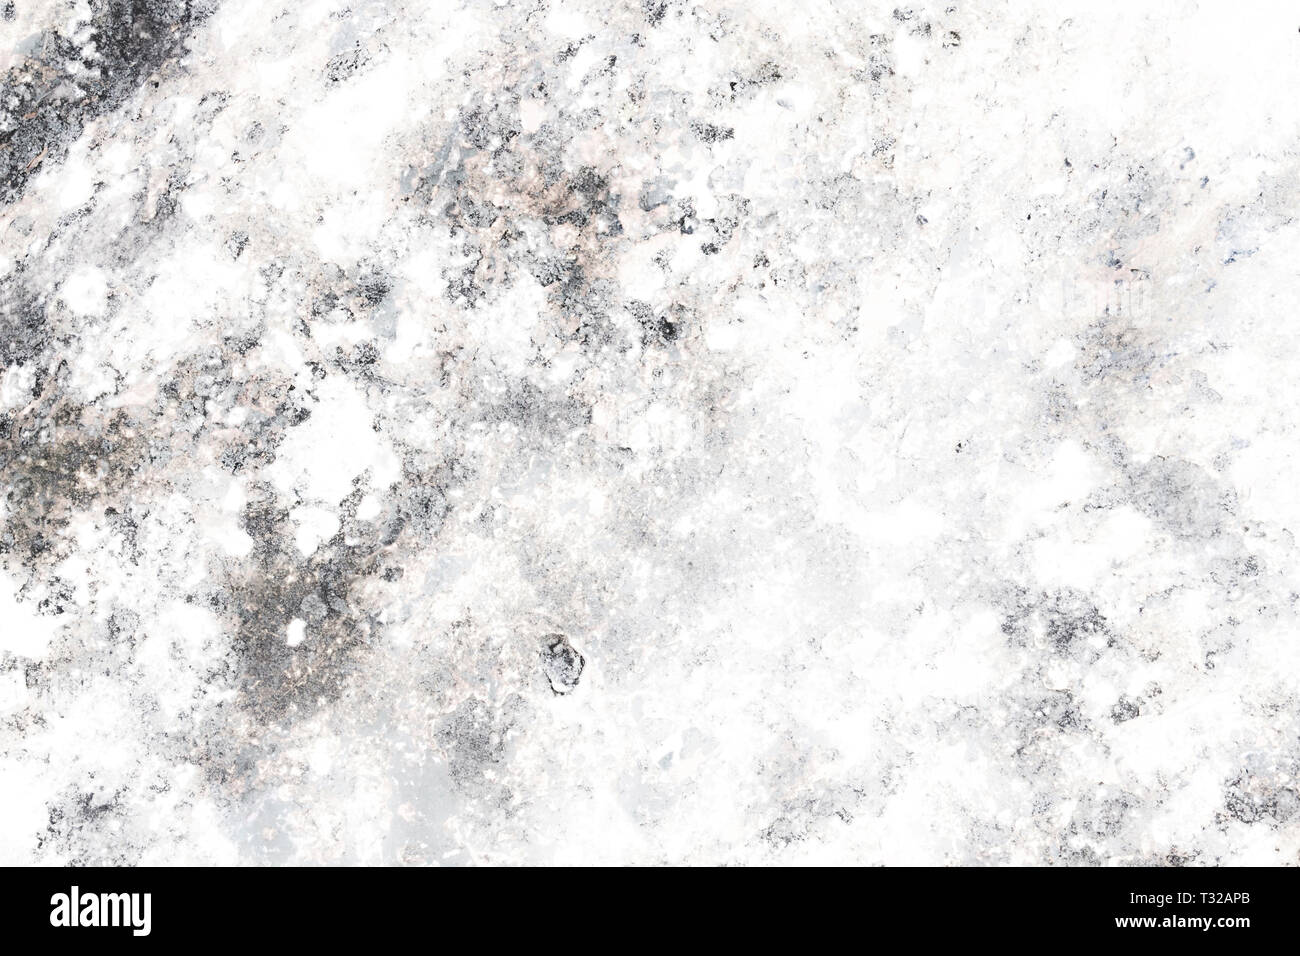 Marble Texture. White, Light Gray, Rose Colors. White Gray Texture Background. High Quality Print. Stock Photo